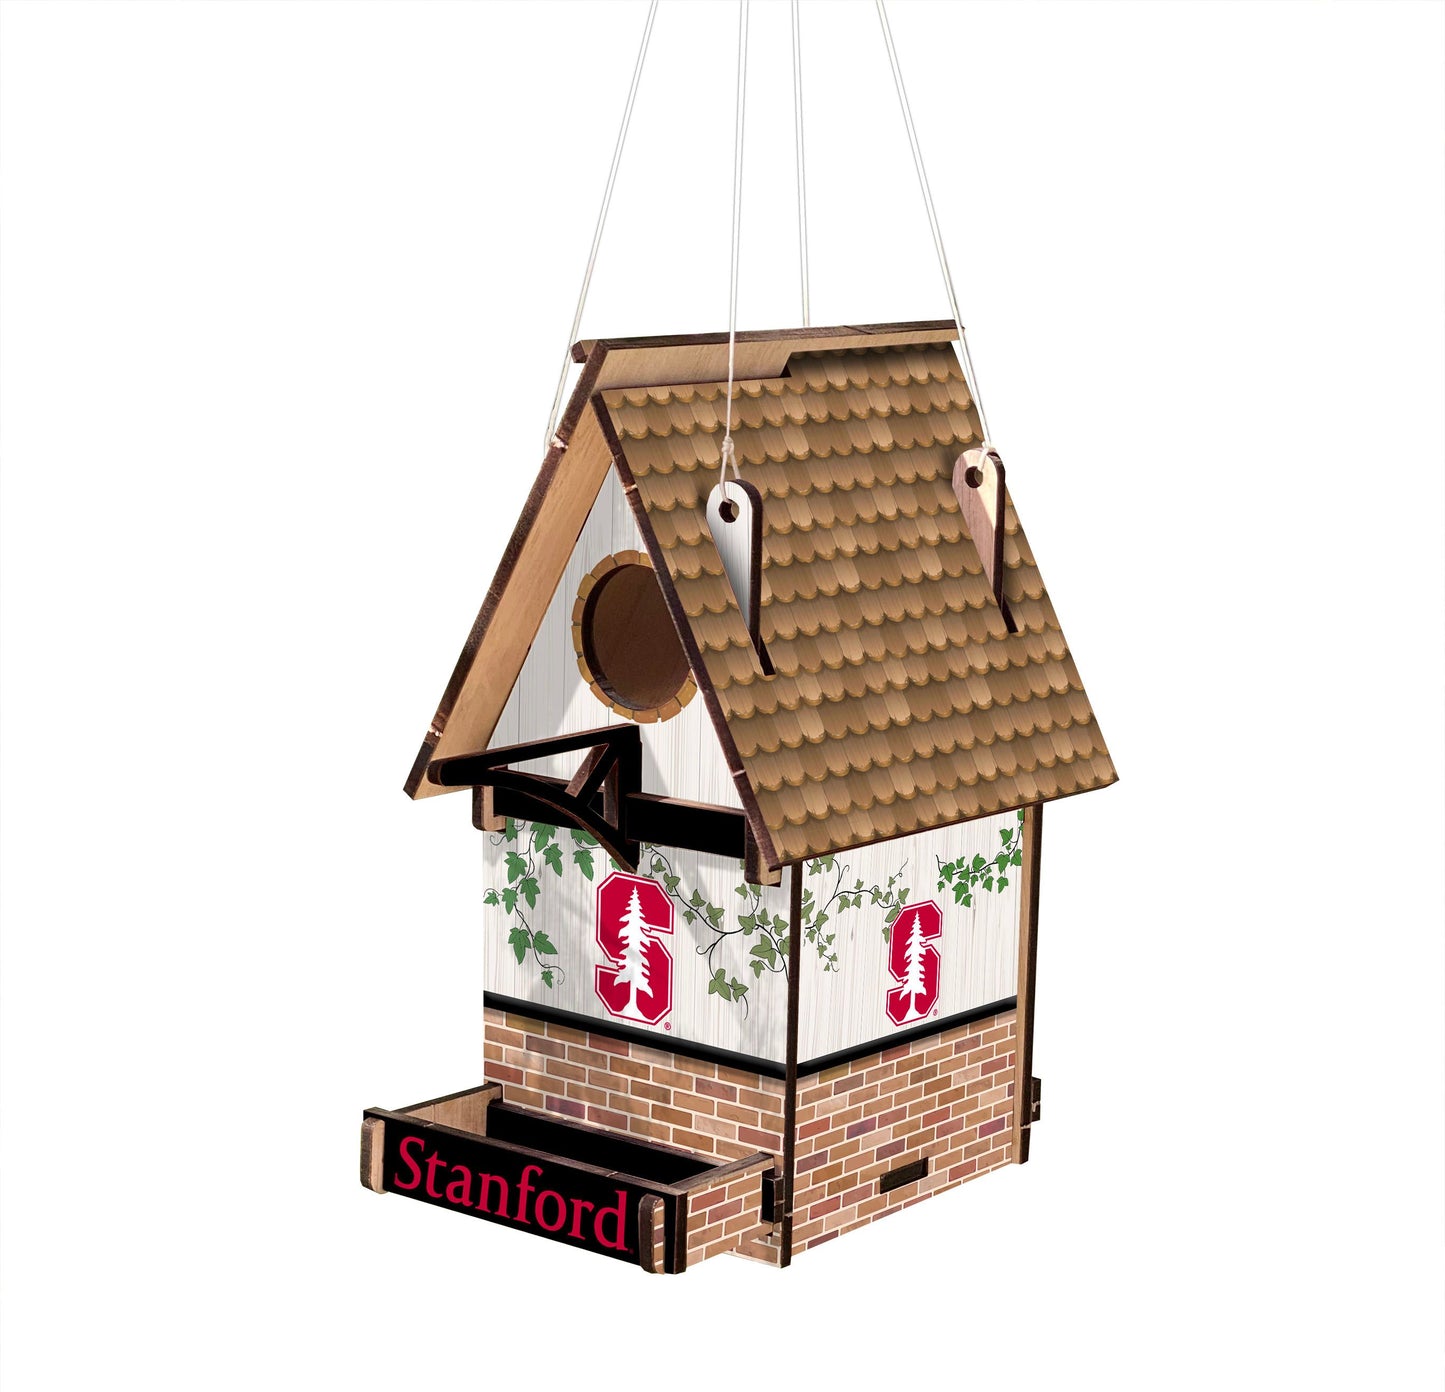 Express your team spirit and love for birds with the Stanford Cardinal Wood Birdhouse by Fan Creations. This officially licensed birdhouse is made of cut and printed MDF, measures 15"x15"